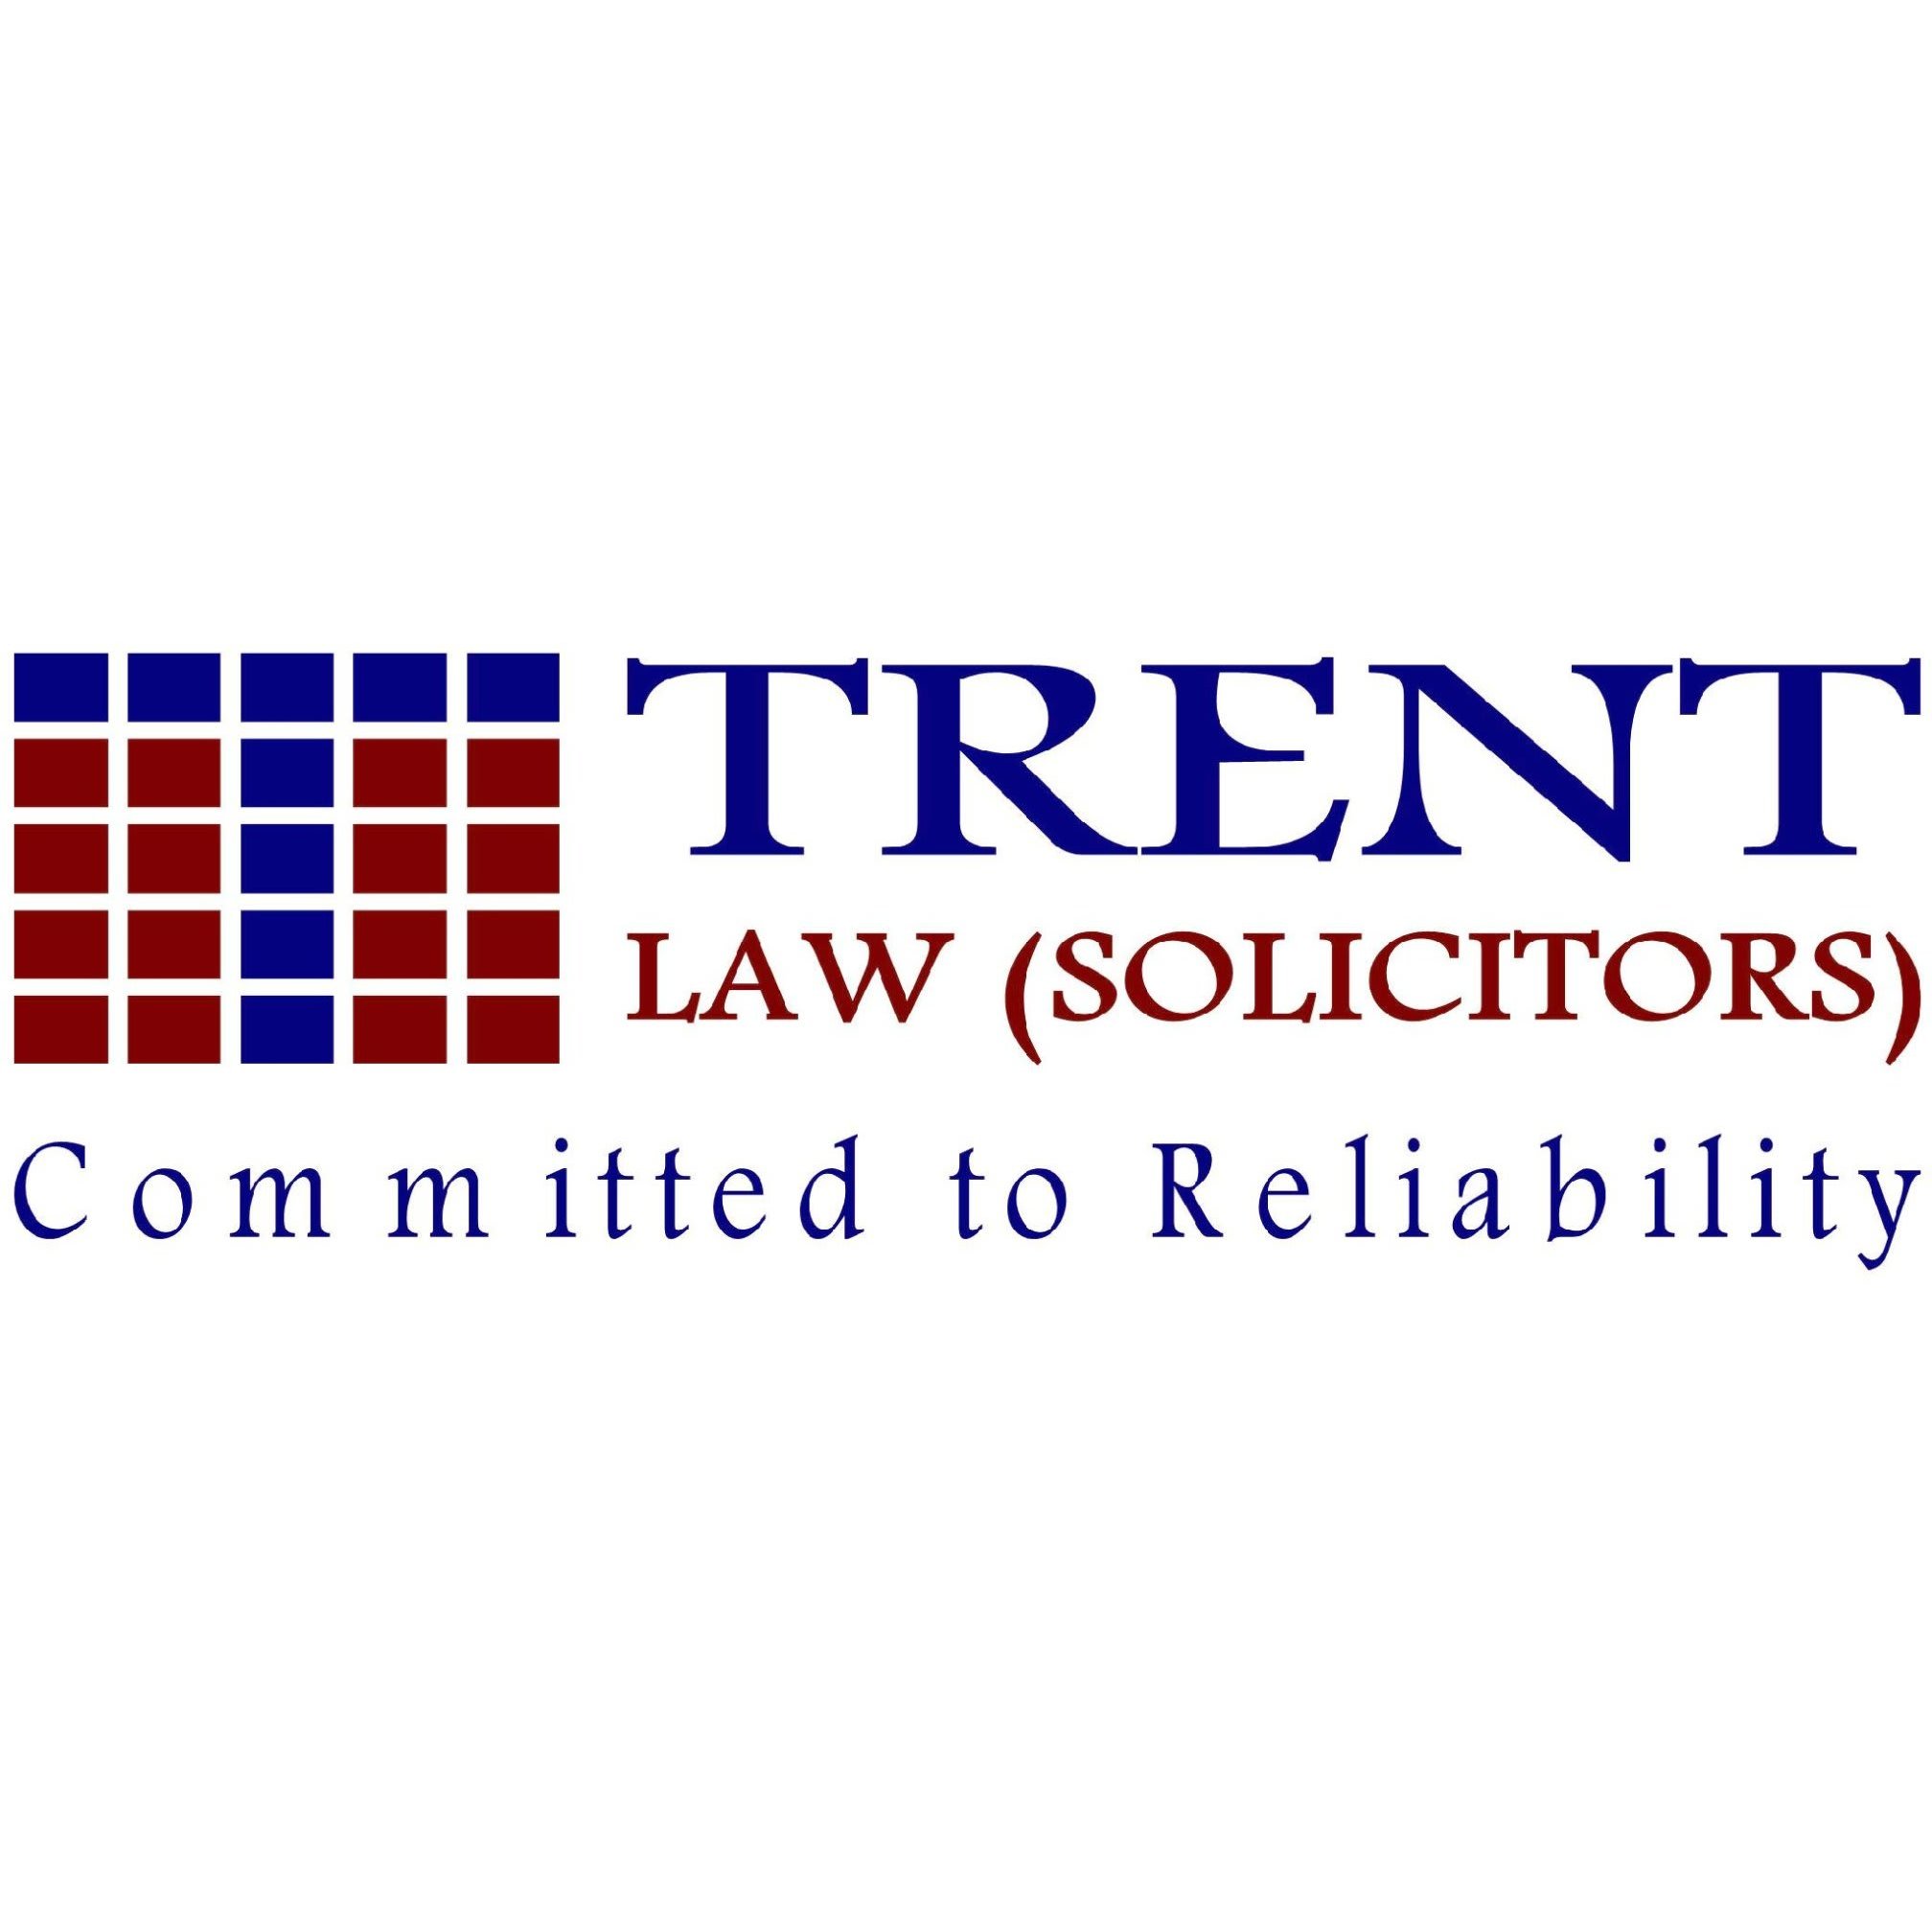 Trent Law (Solicitors) - Nottingham, Nottinghamshire NG2 1AE - 01158 716123 | ShowMeLocal.com